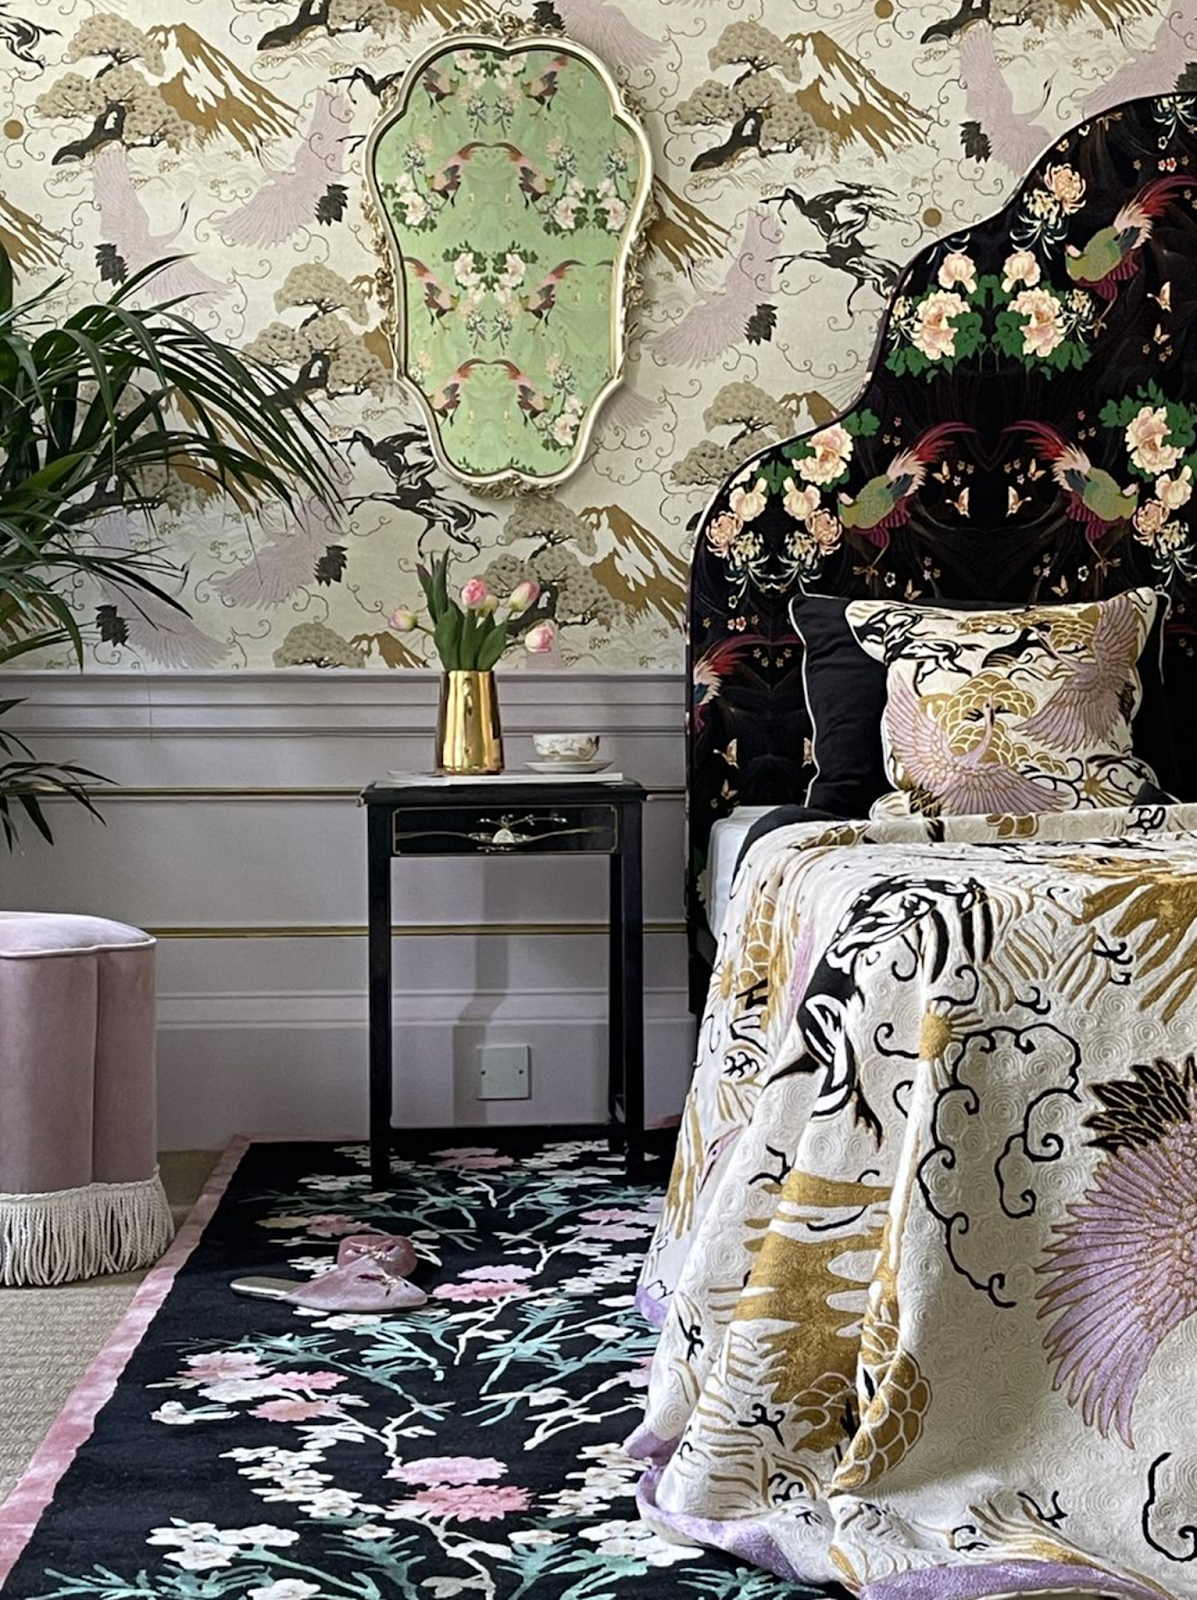 In celebration of Art Deco style and Chinoiserie design – Wendy Morrison